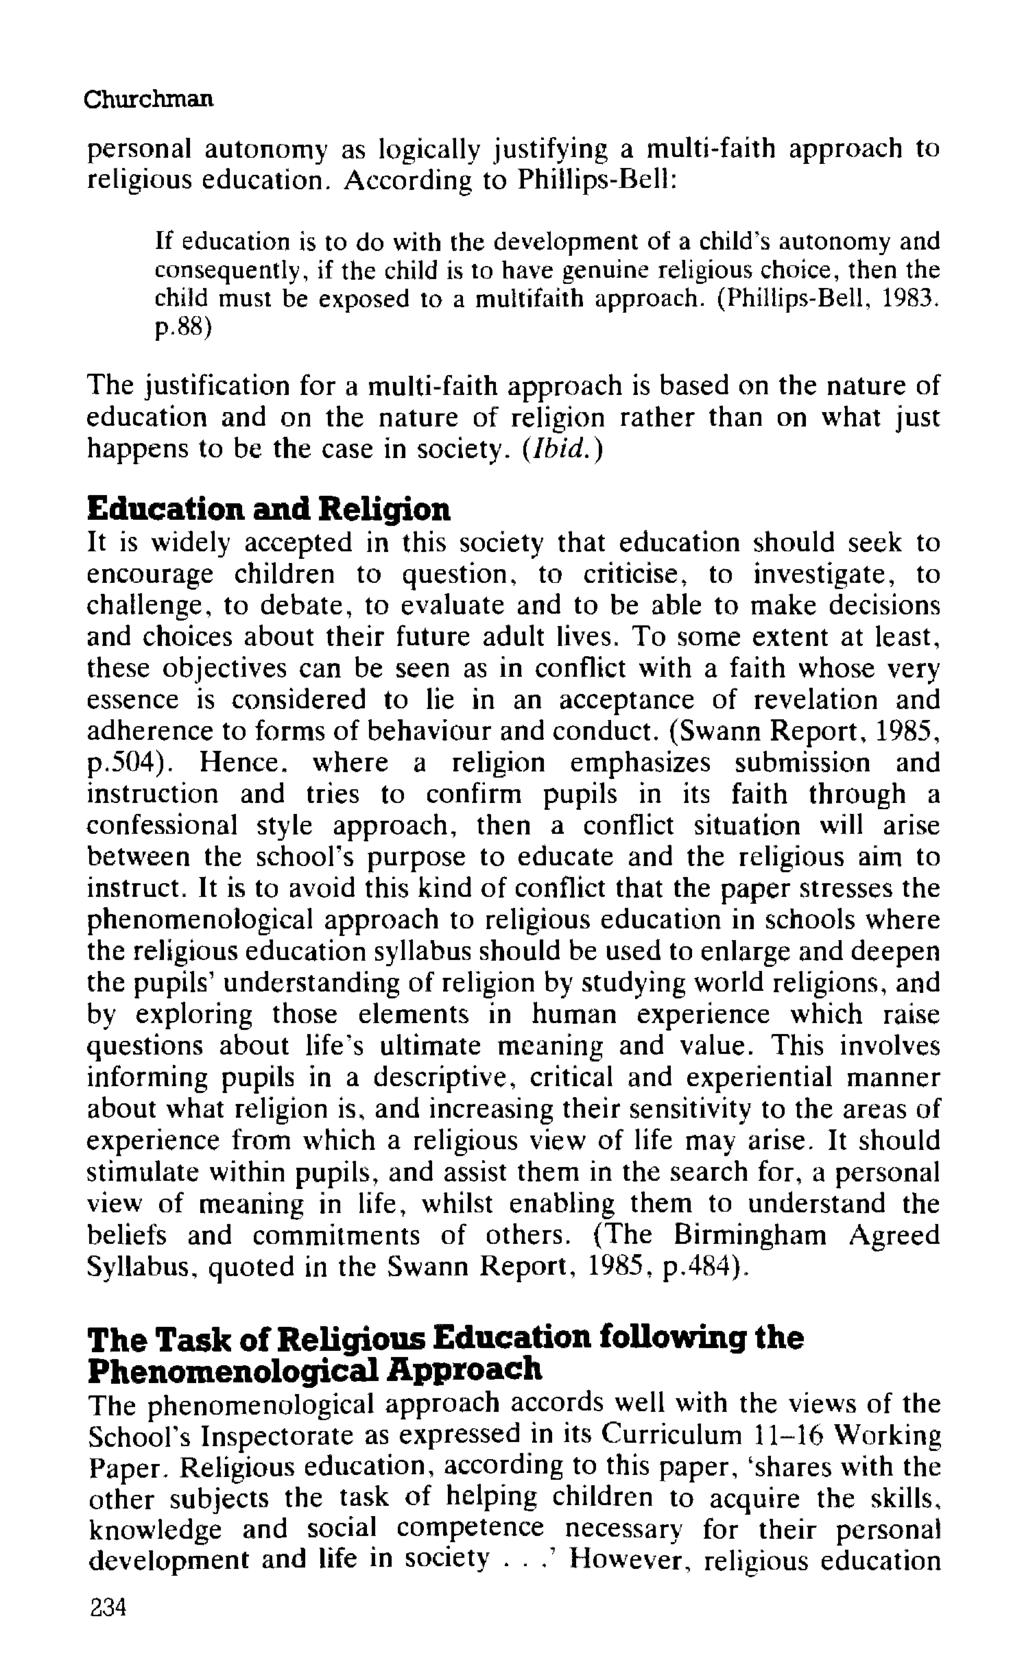 Churchman personal autonomy as logically justifying a multi-faith approach to religious education.